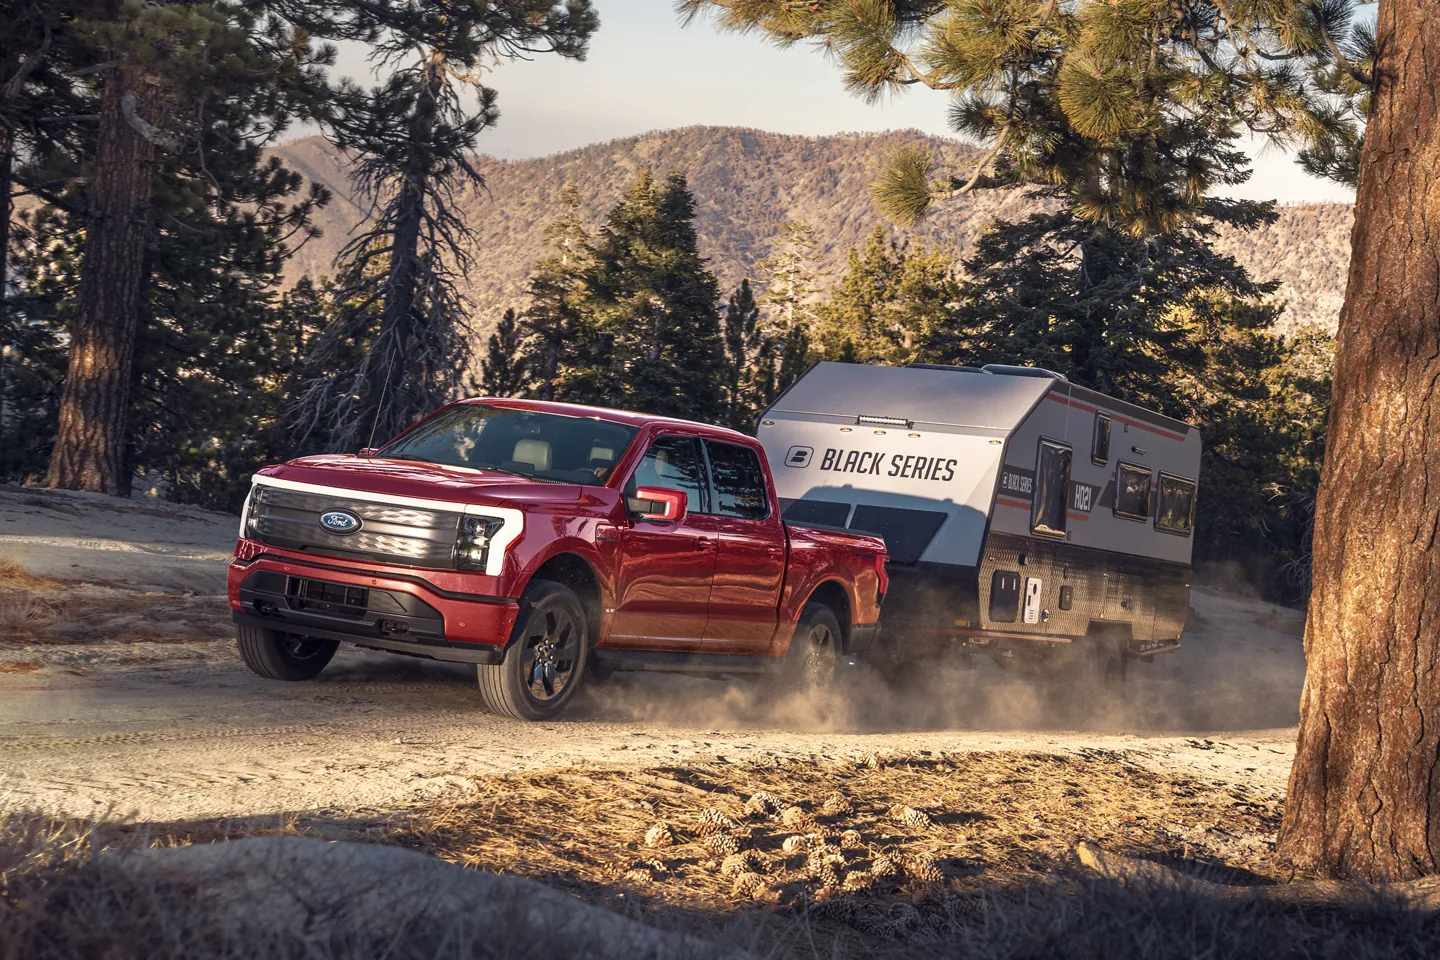 The 2022 Ford F-150 Lightning® combines ruggedness, capability, and efficiency to get the job done right. Experience the lightning power of this legendary truck. The Ford of Franklin lot has a full selection of F-150 Lightning on their showroom floor, ready to be driven away today.